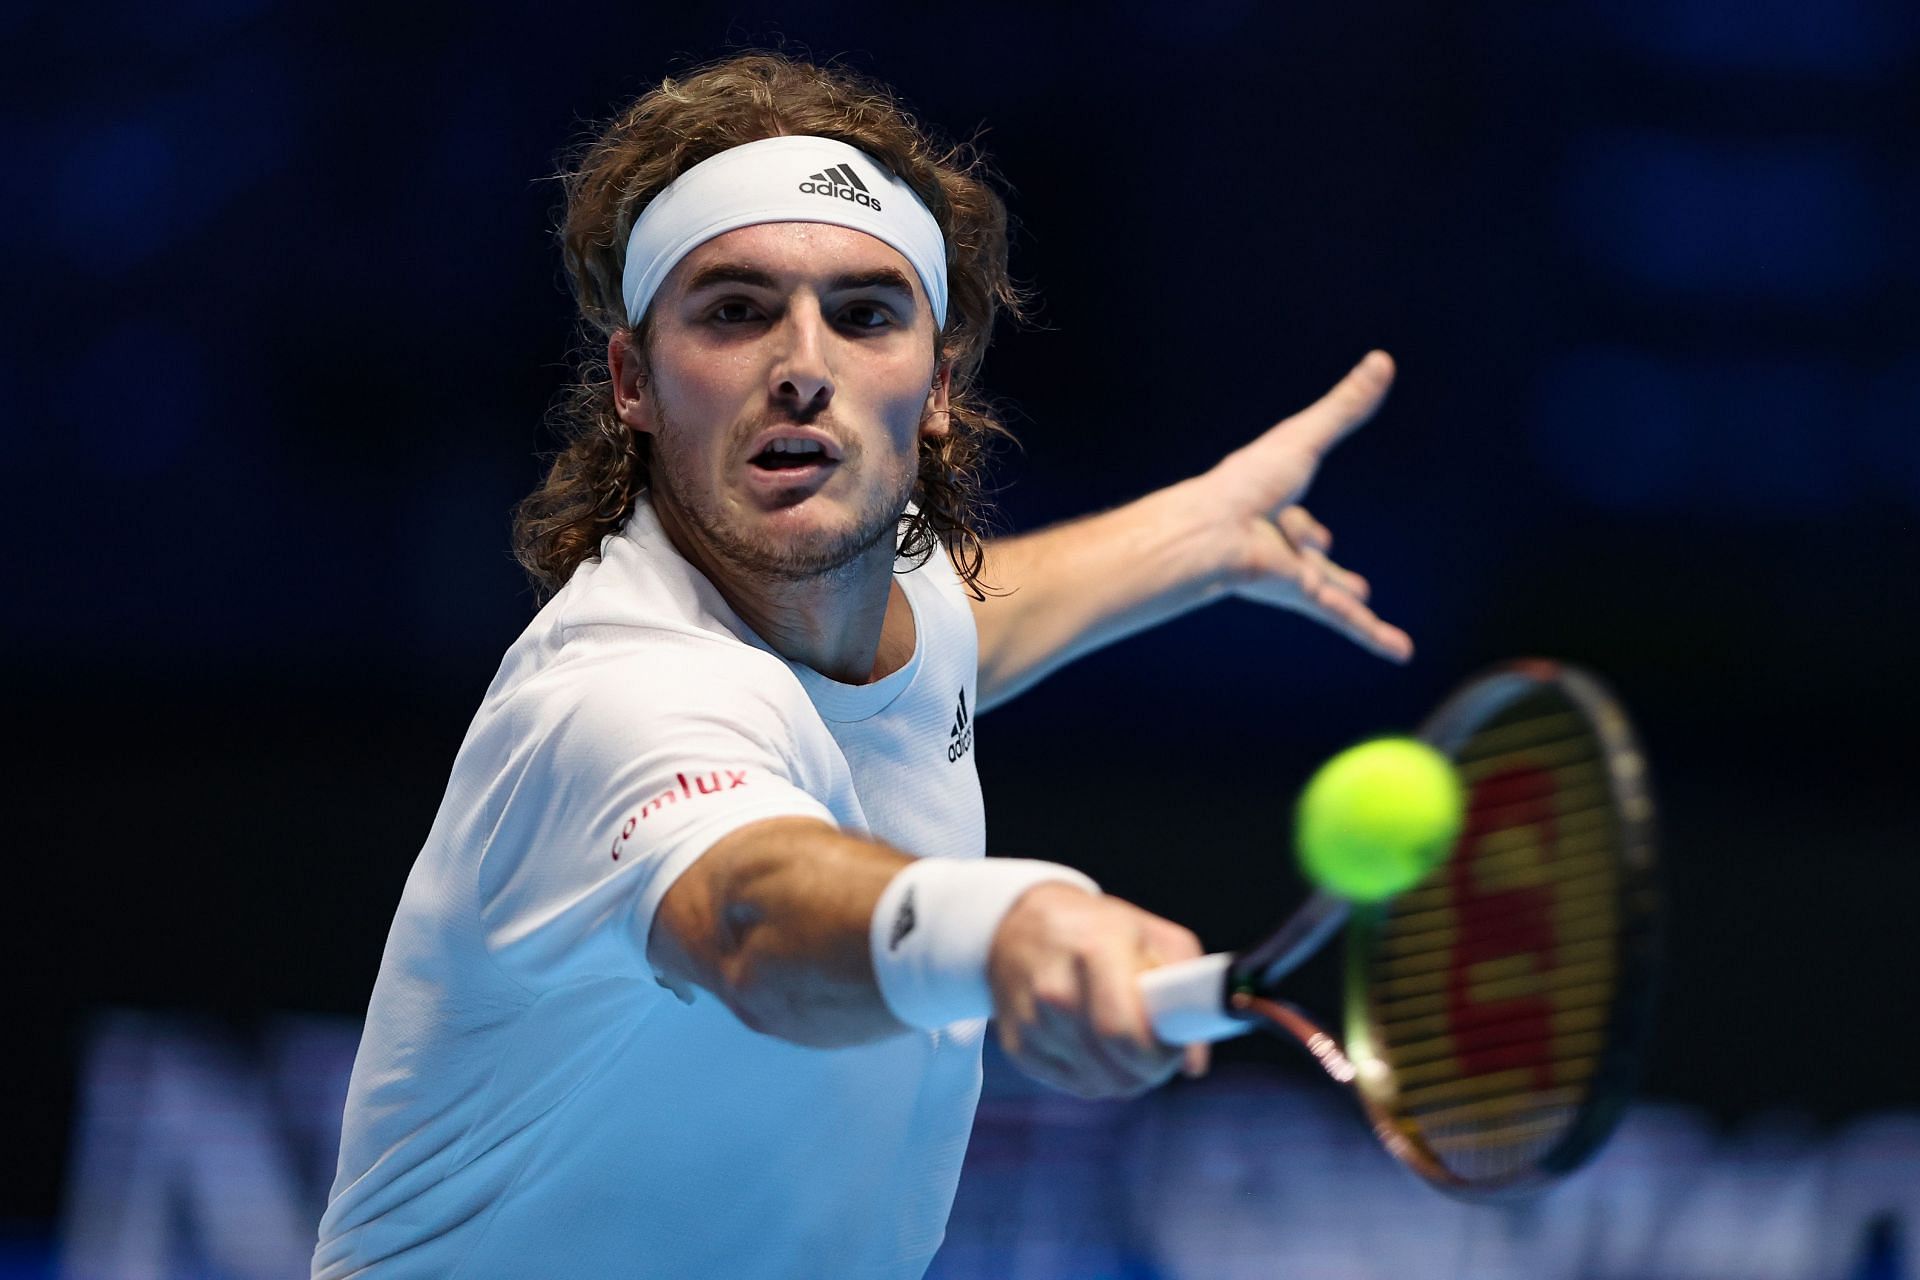 Stefanos Tsitsipas in action at the Nitto ATP Finals